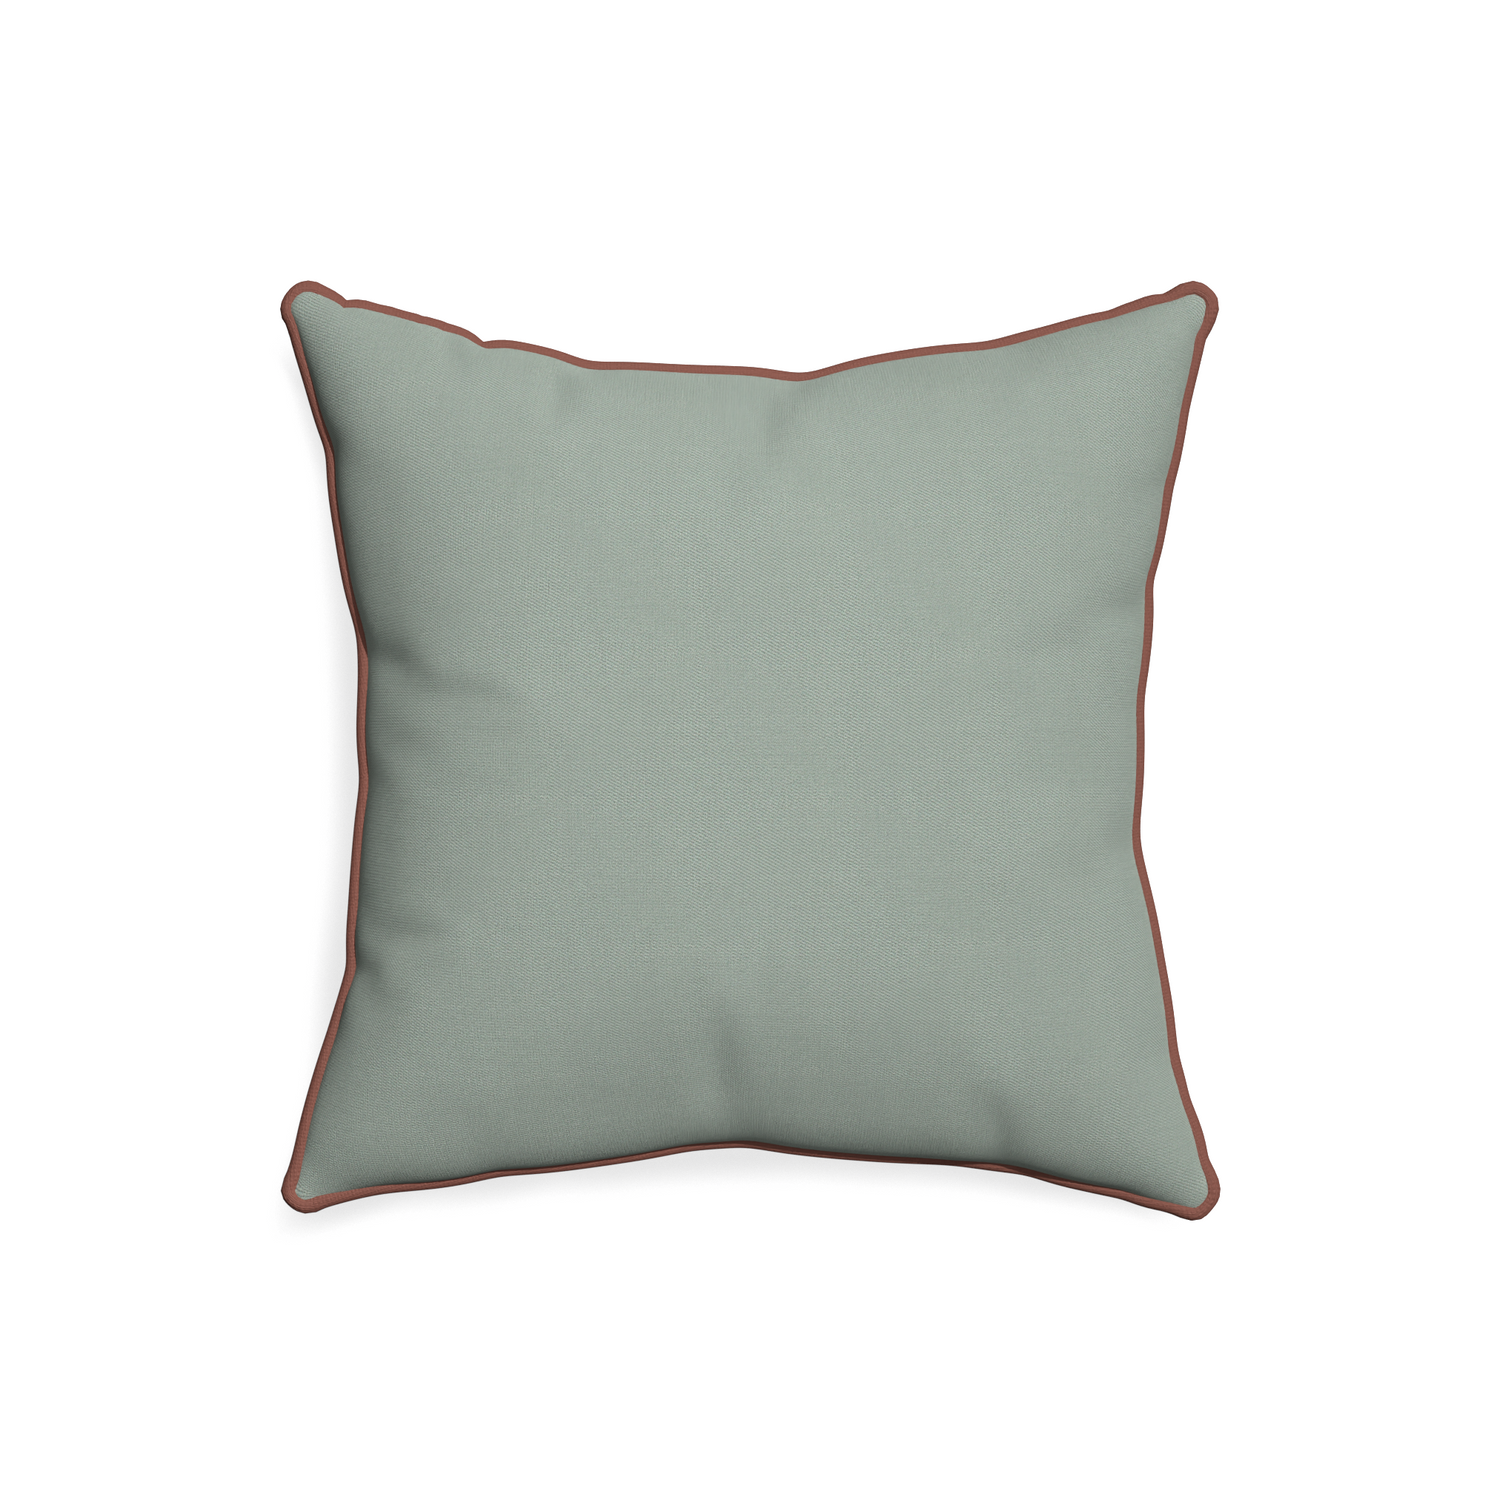 20-square sage custom pillow with w piping on white background